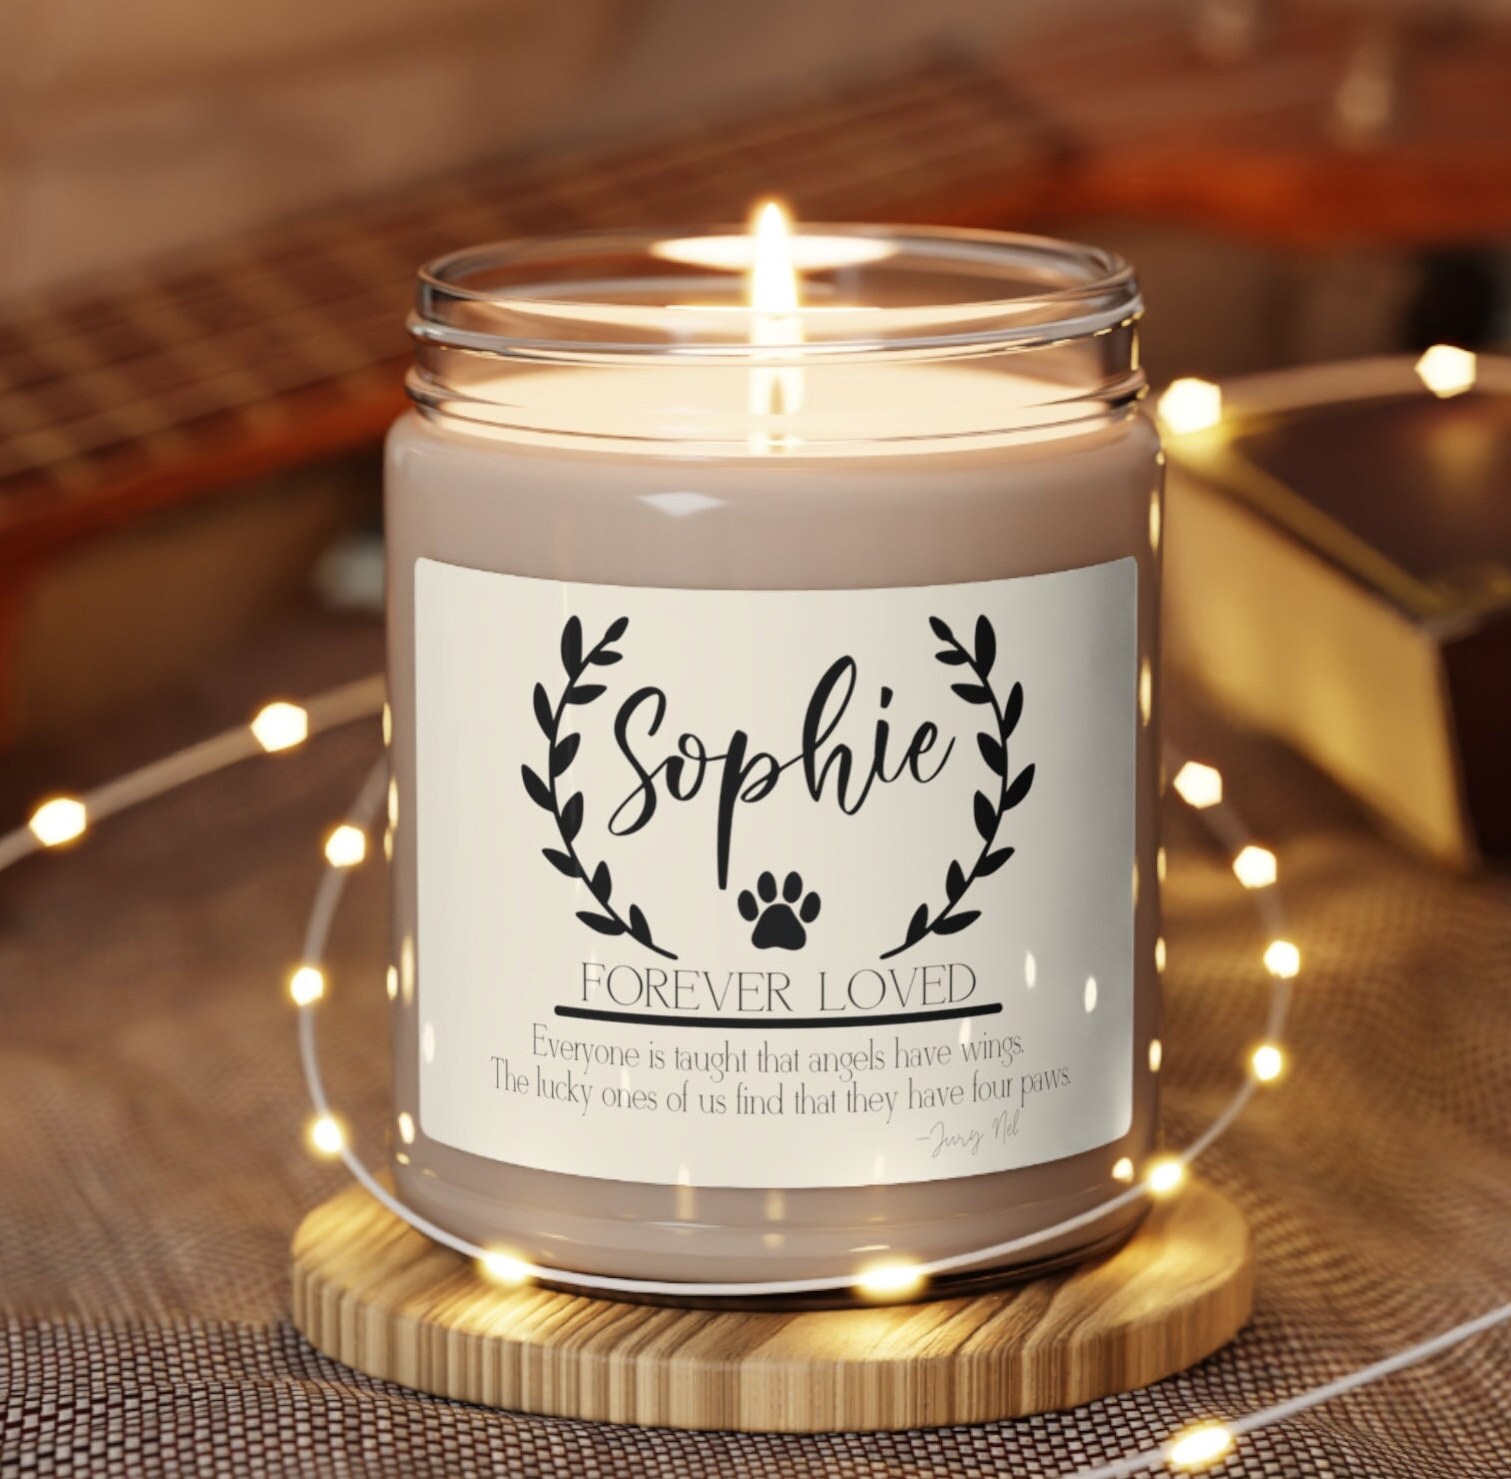 Funny Dog Candle 8.5 oz – Ocean Avenue Candle Co